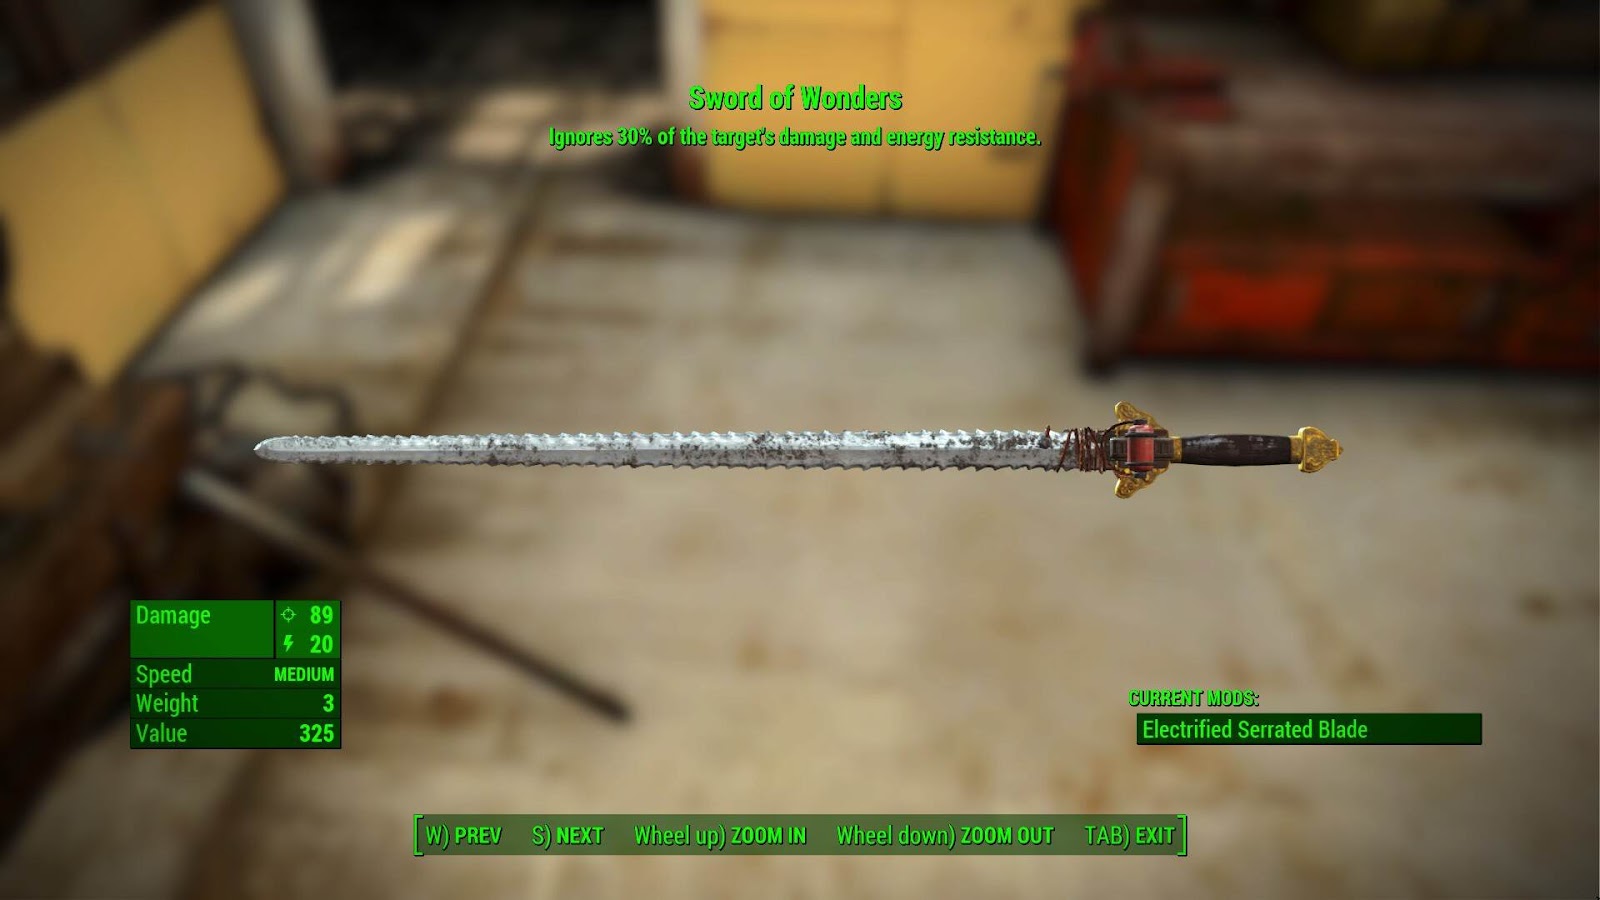 The Sword of Wonders, a Chinese Jian sword with a serrated blade and electrical wire around the hilt, viewed through the inventory UI of Fallout 4.